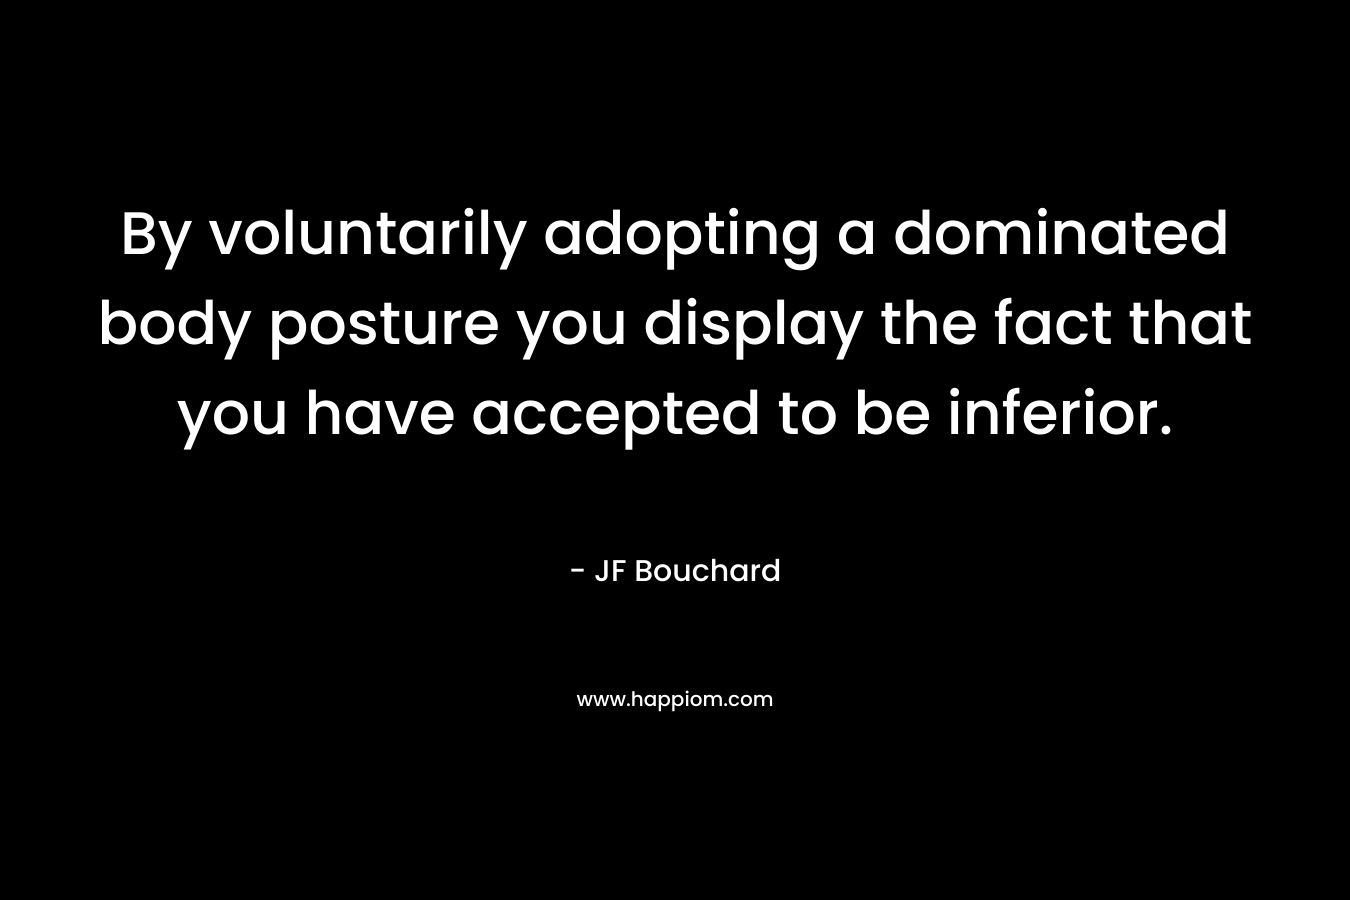 By voluntarily adopting a dominated body posture you display the fact that you have accepted to be inferior.